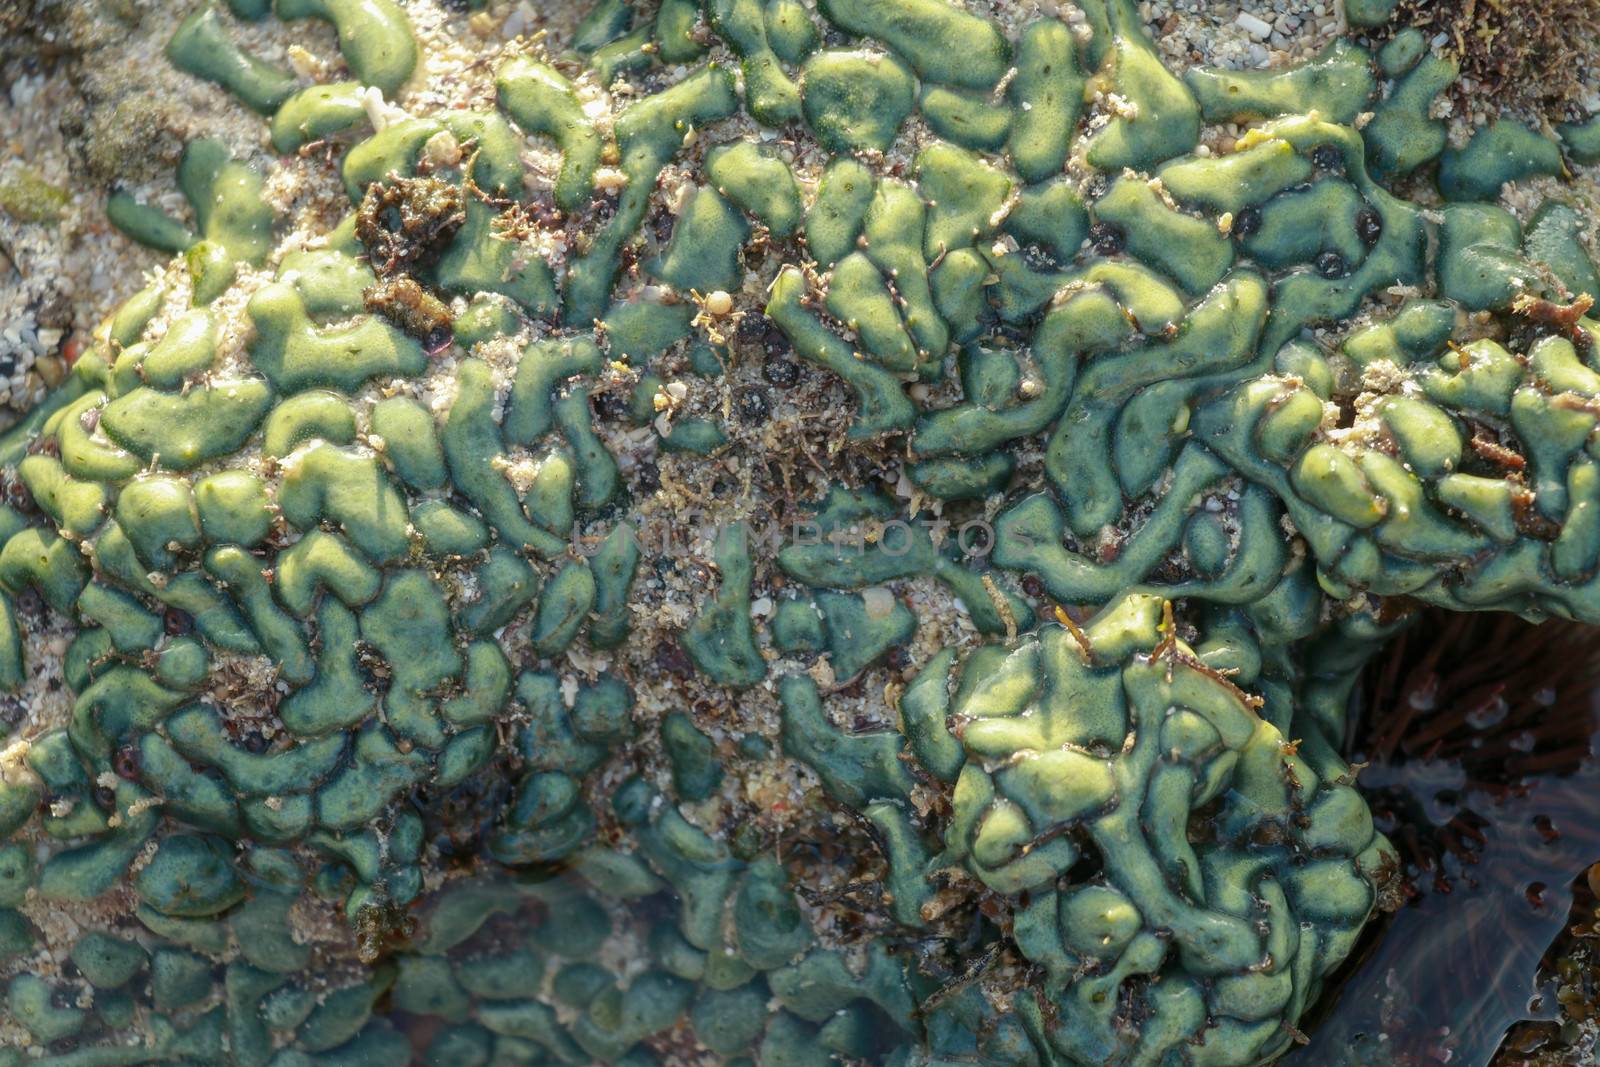 view of a coral reef at low tide, during day light in a sunny day.